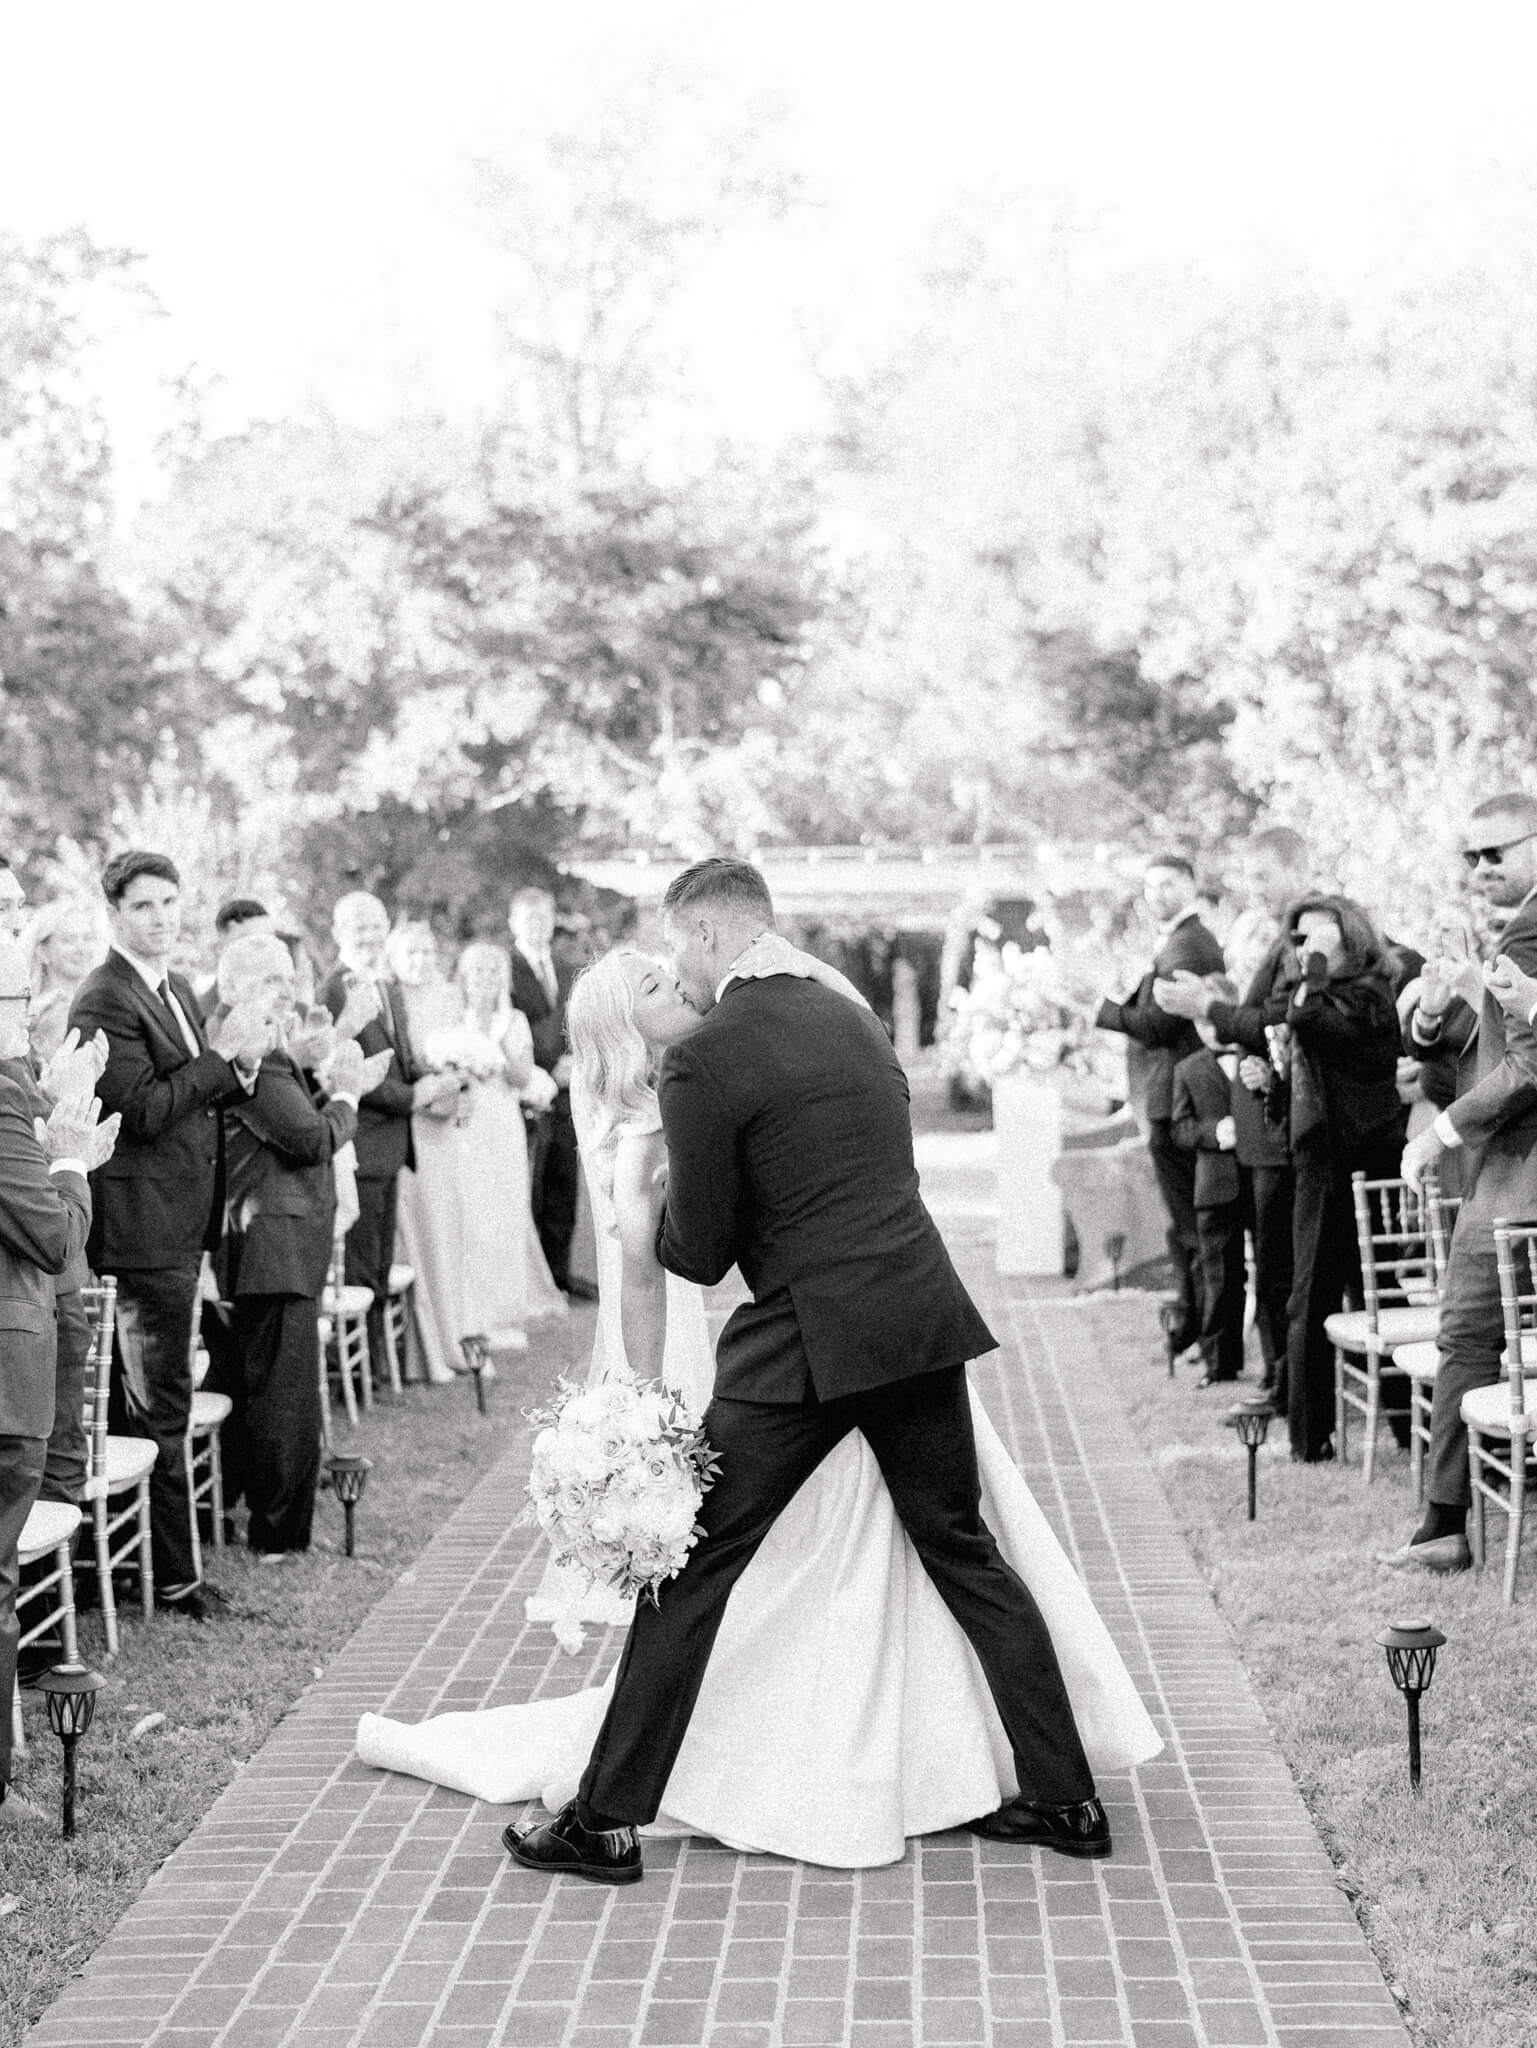 Black and white image of a groom kissing his bride and dipping her back at the end of the ceremony isle while guests watch and clap.